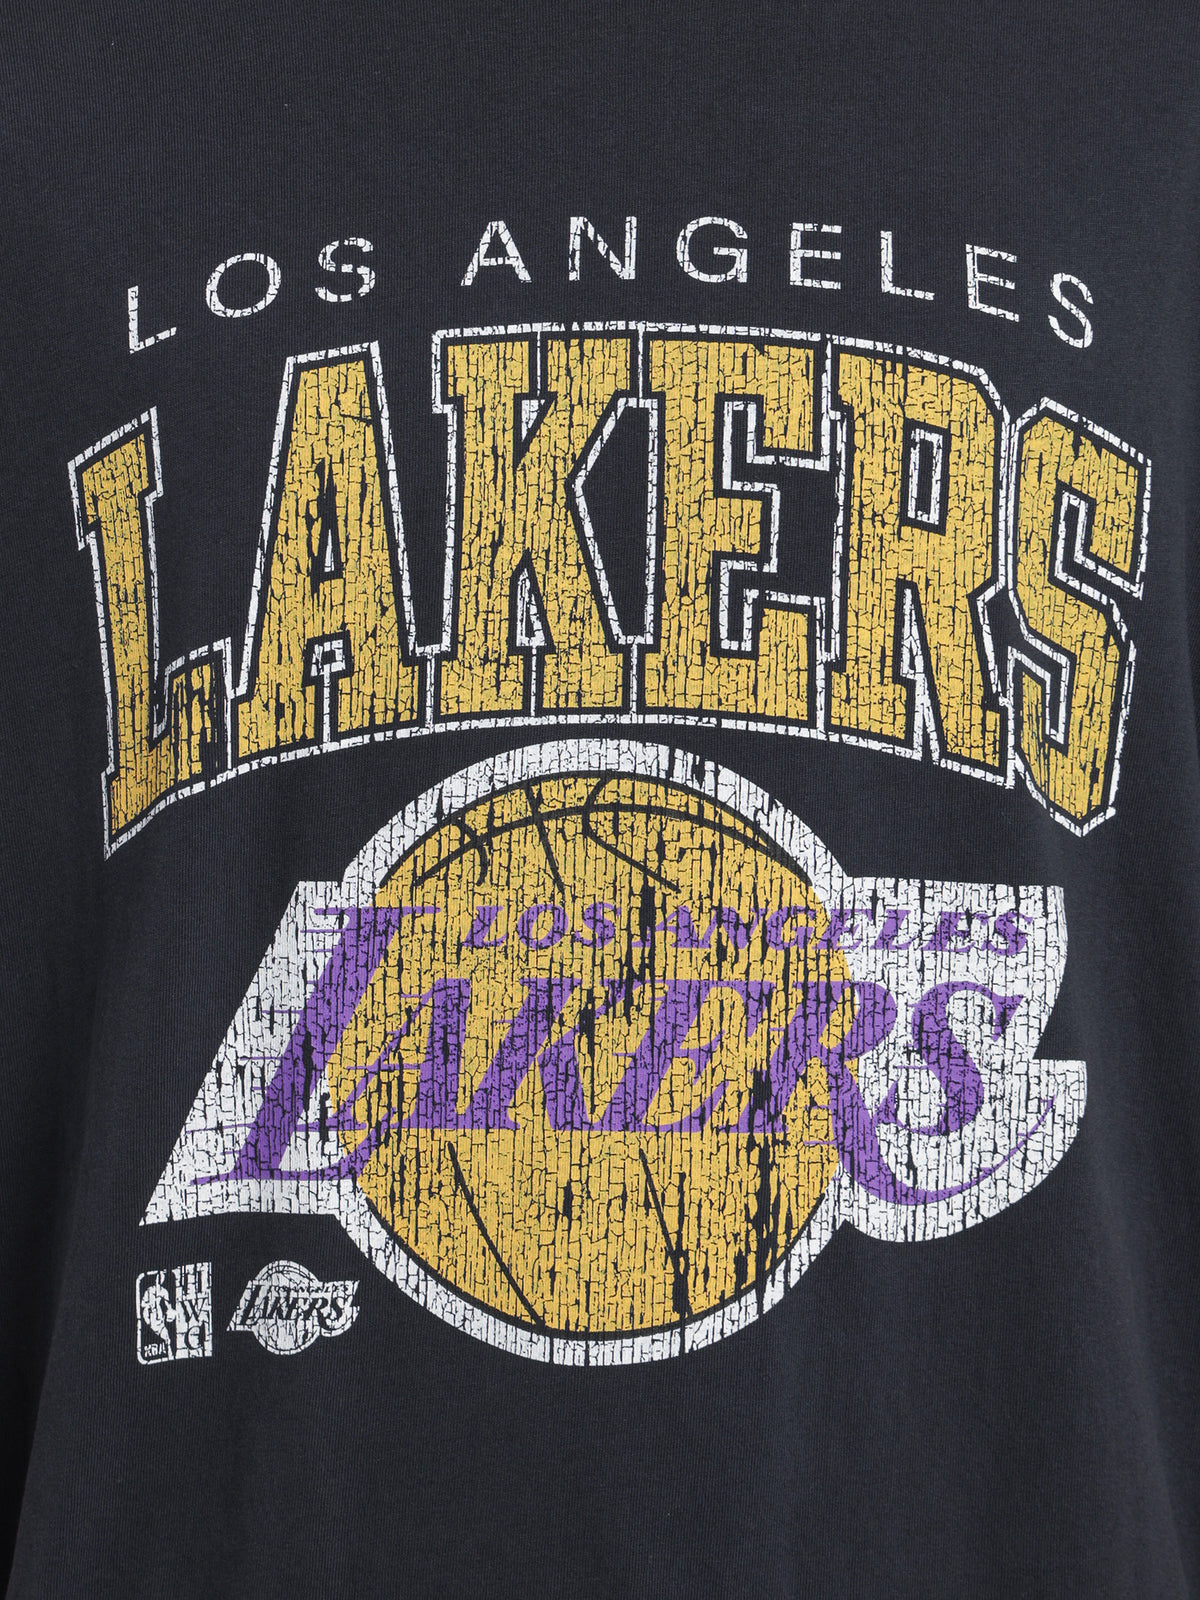 XL Arch Lakers T-Shirt in Faded Black